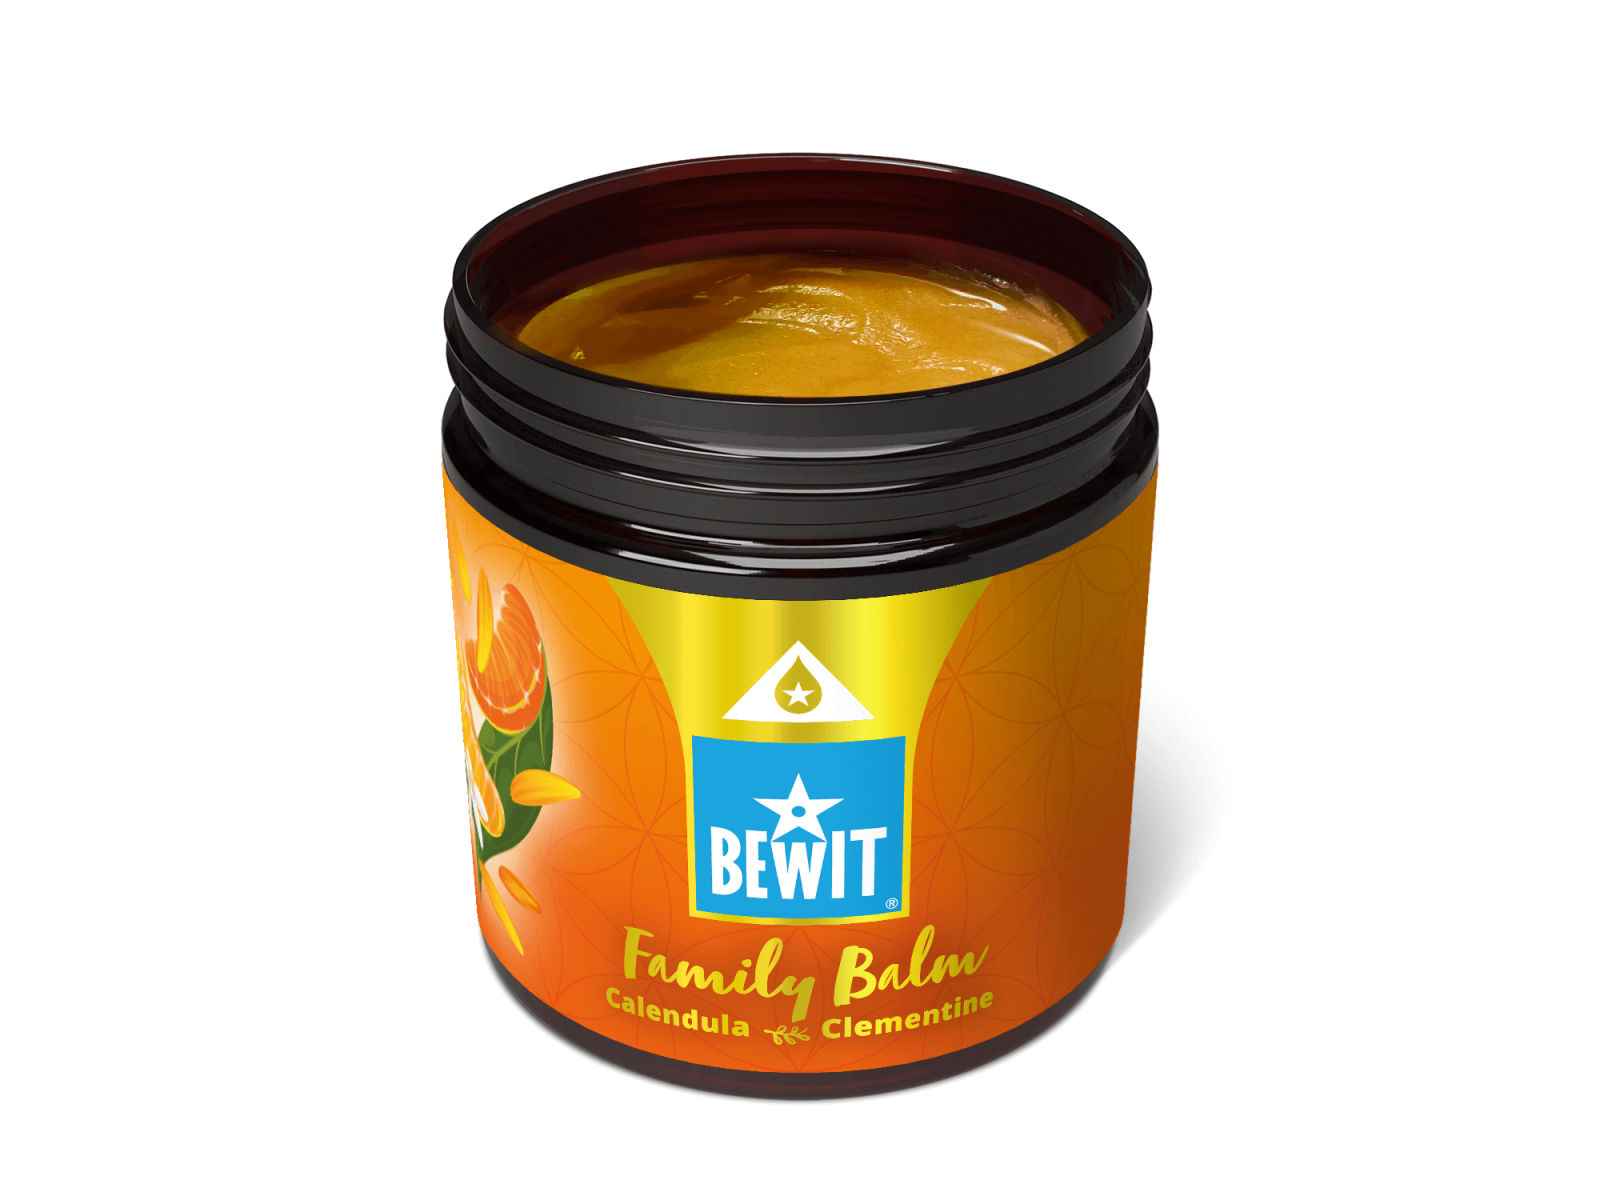 BEWIT FAMILY BALM CALENDULA AND CLEMENTINE - CARING BALM FOR THE WHOLE FAMILY - 3